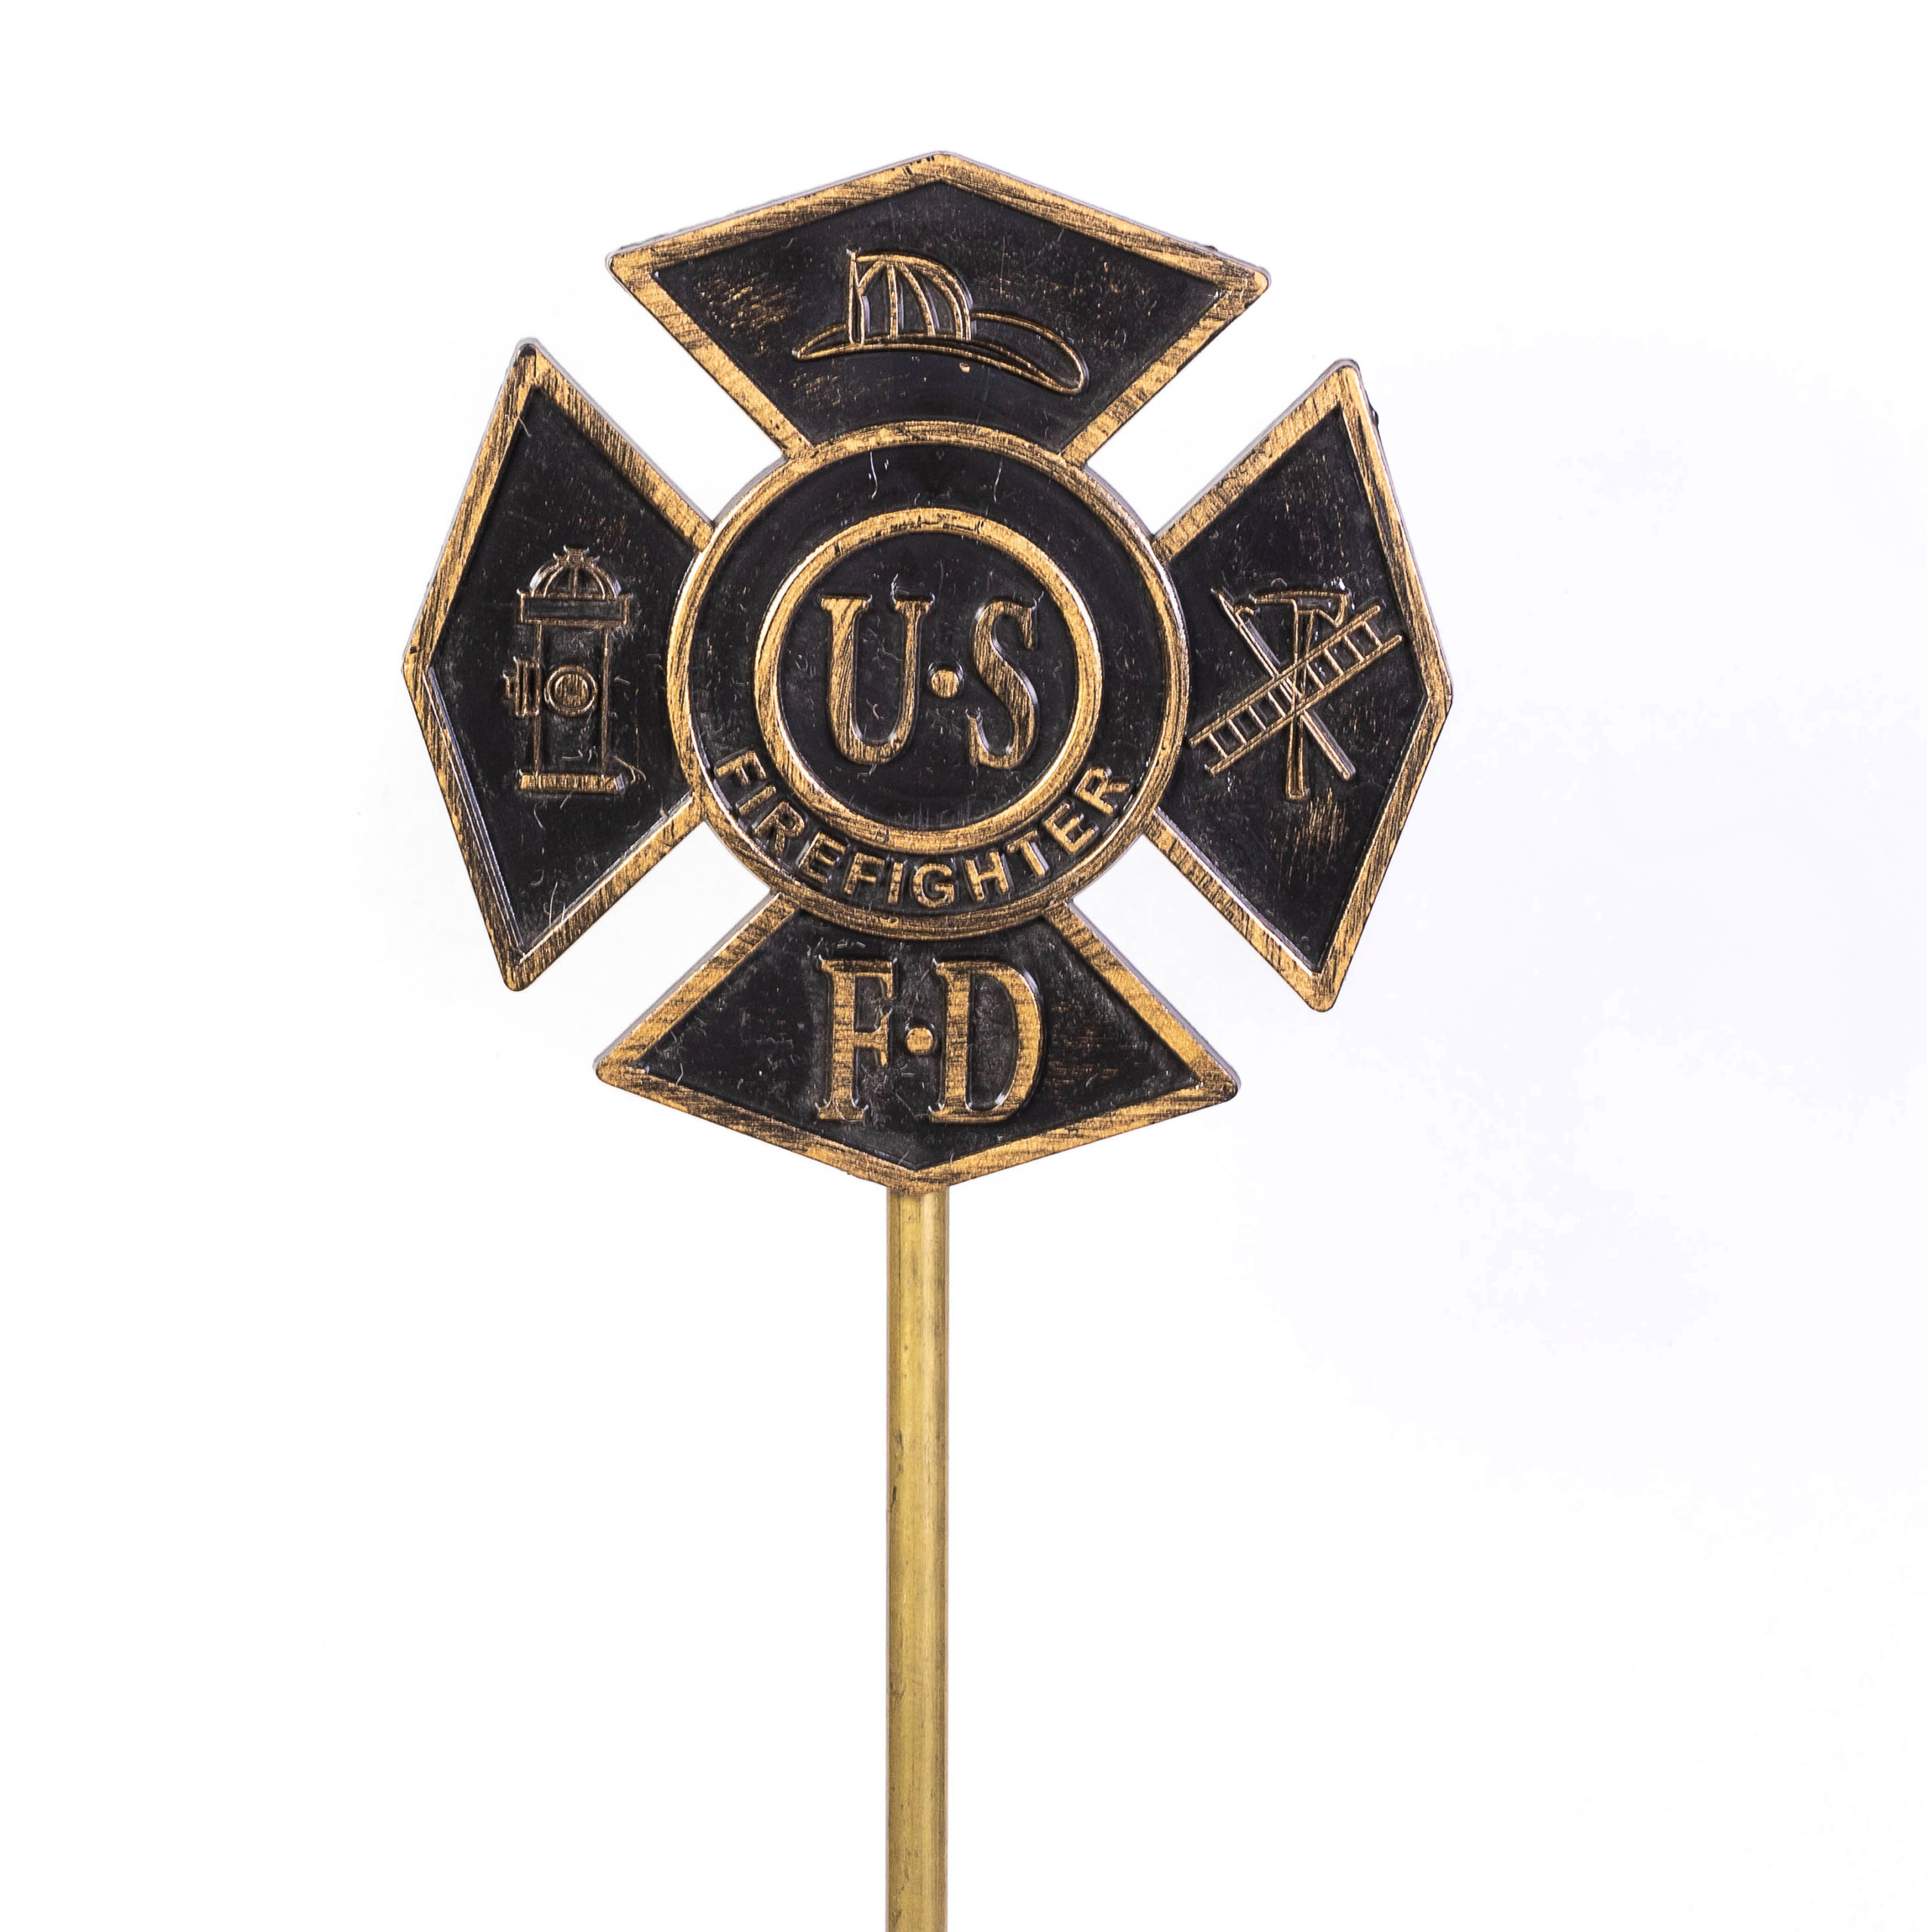 Firefighter Grave Marker | Fireman Grave Markers | Memorial Products | Cemetery Supplies